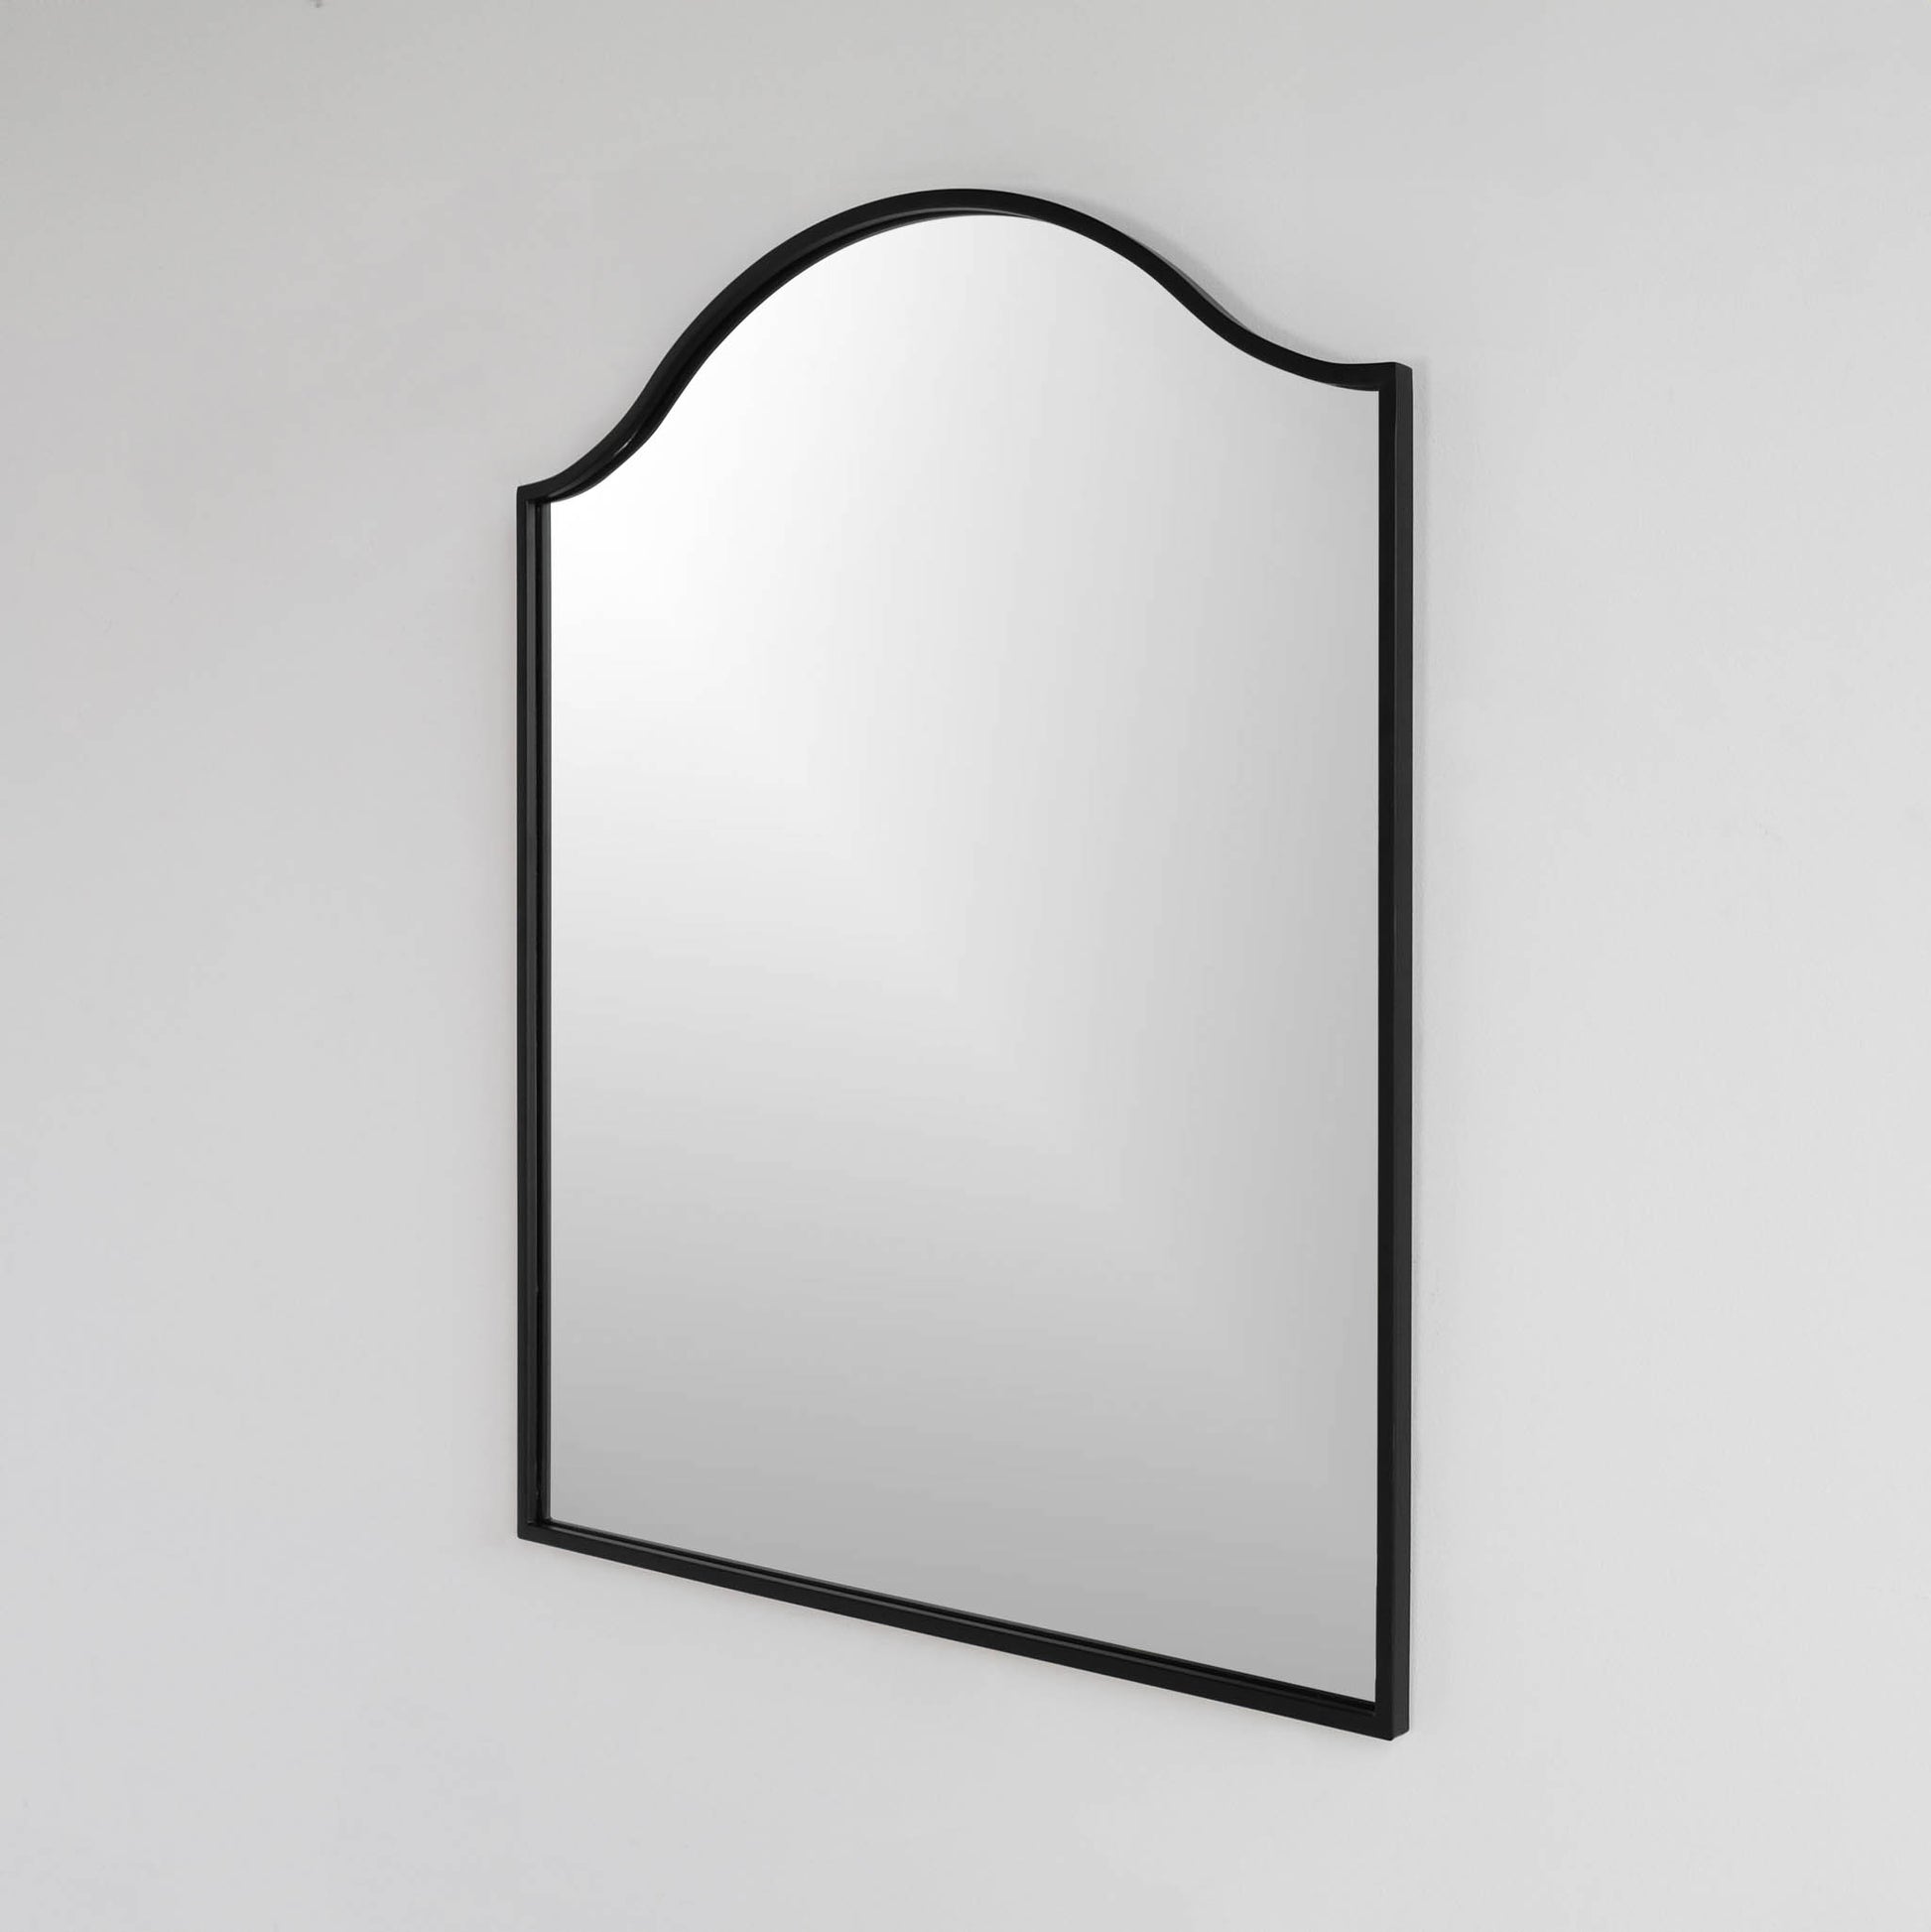 Side view of Tudor-inspired mirror: Four-centered arch design